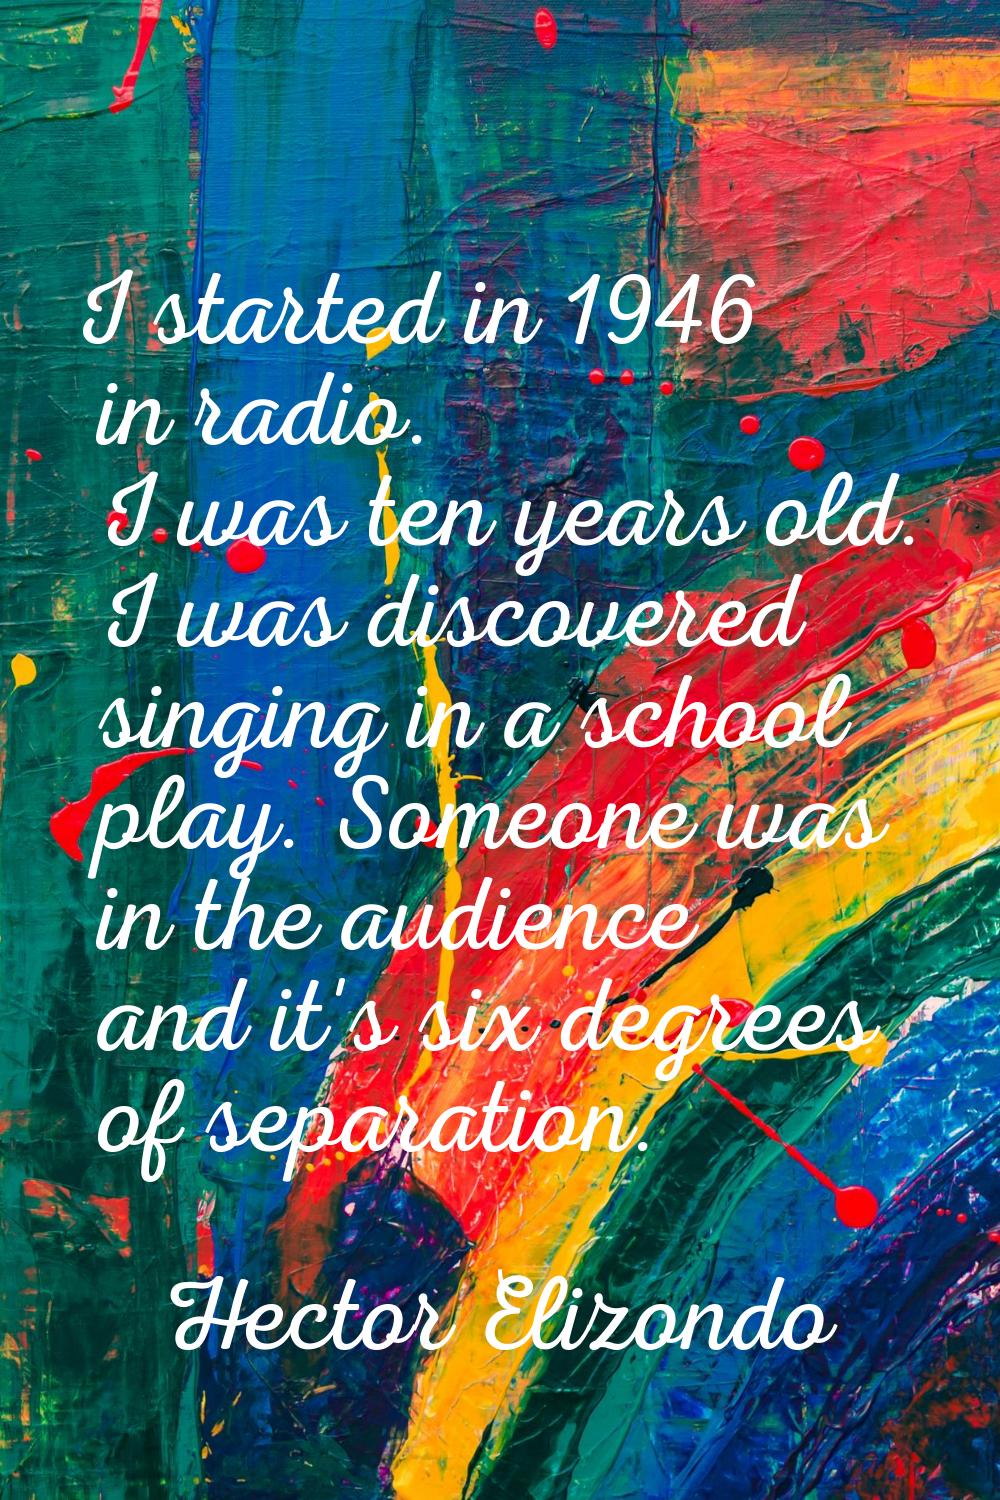 I started in 1946 in radio. I was ten years old. I was discovered singing in a school play. Someone